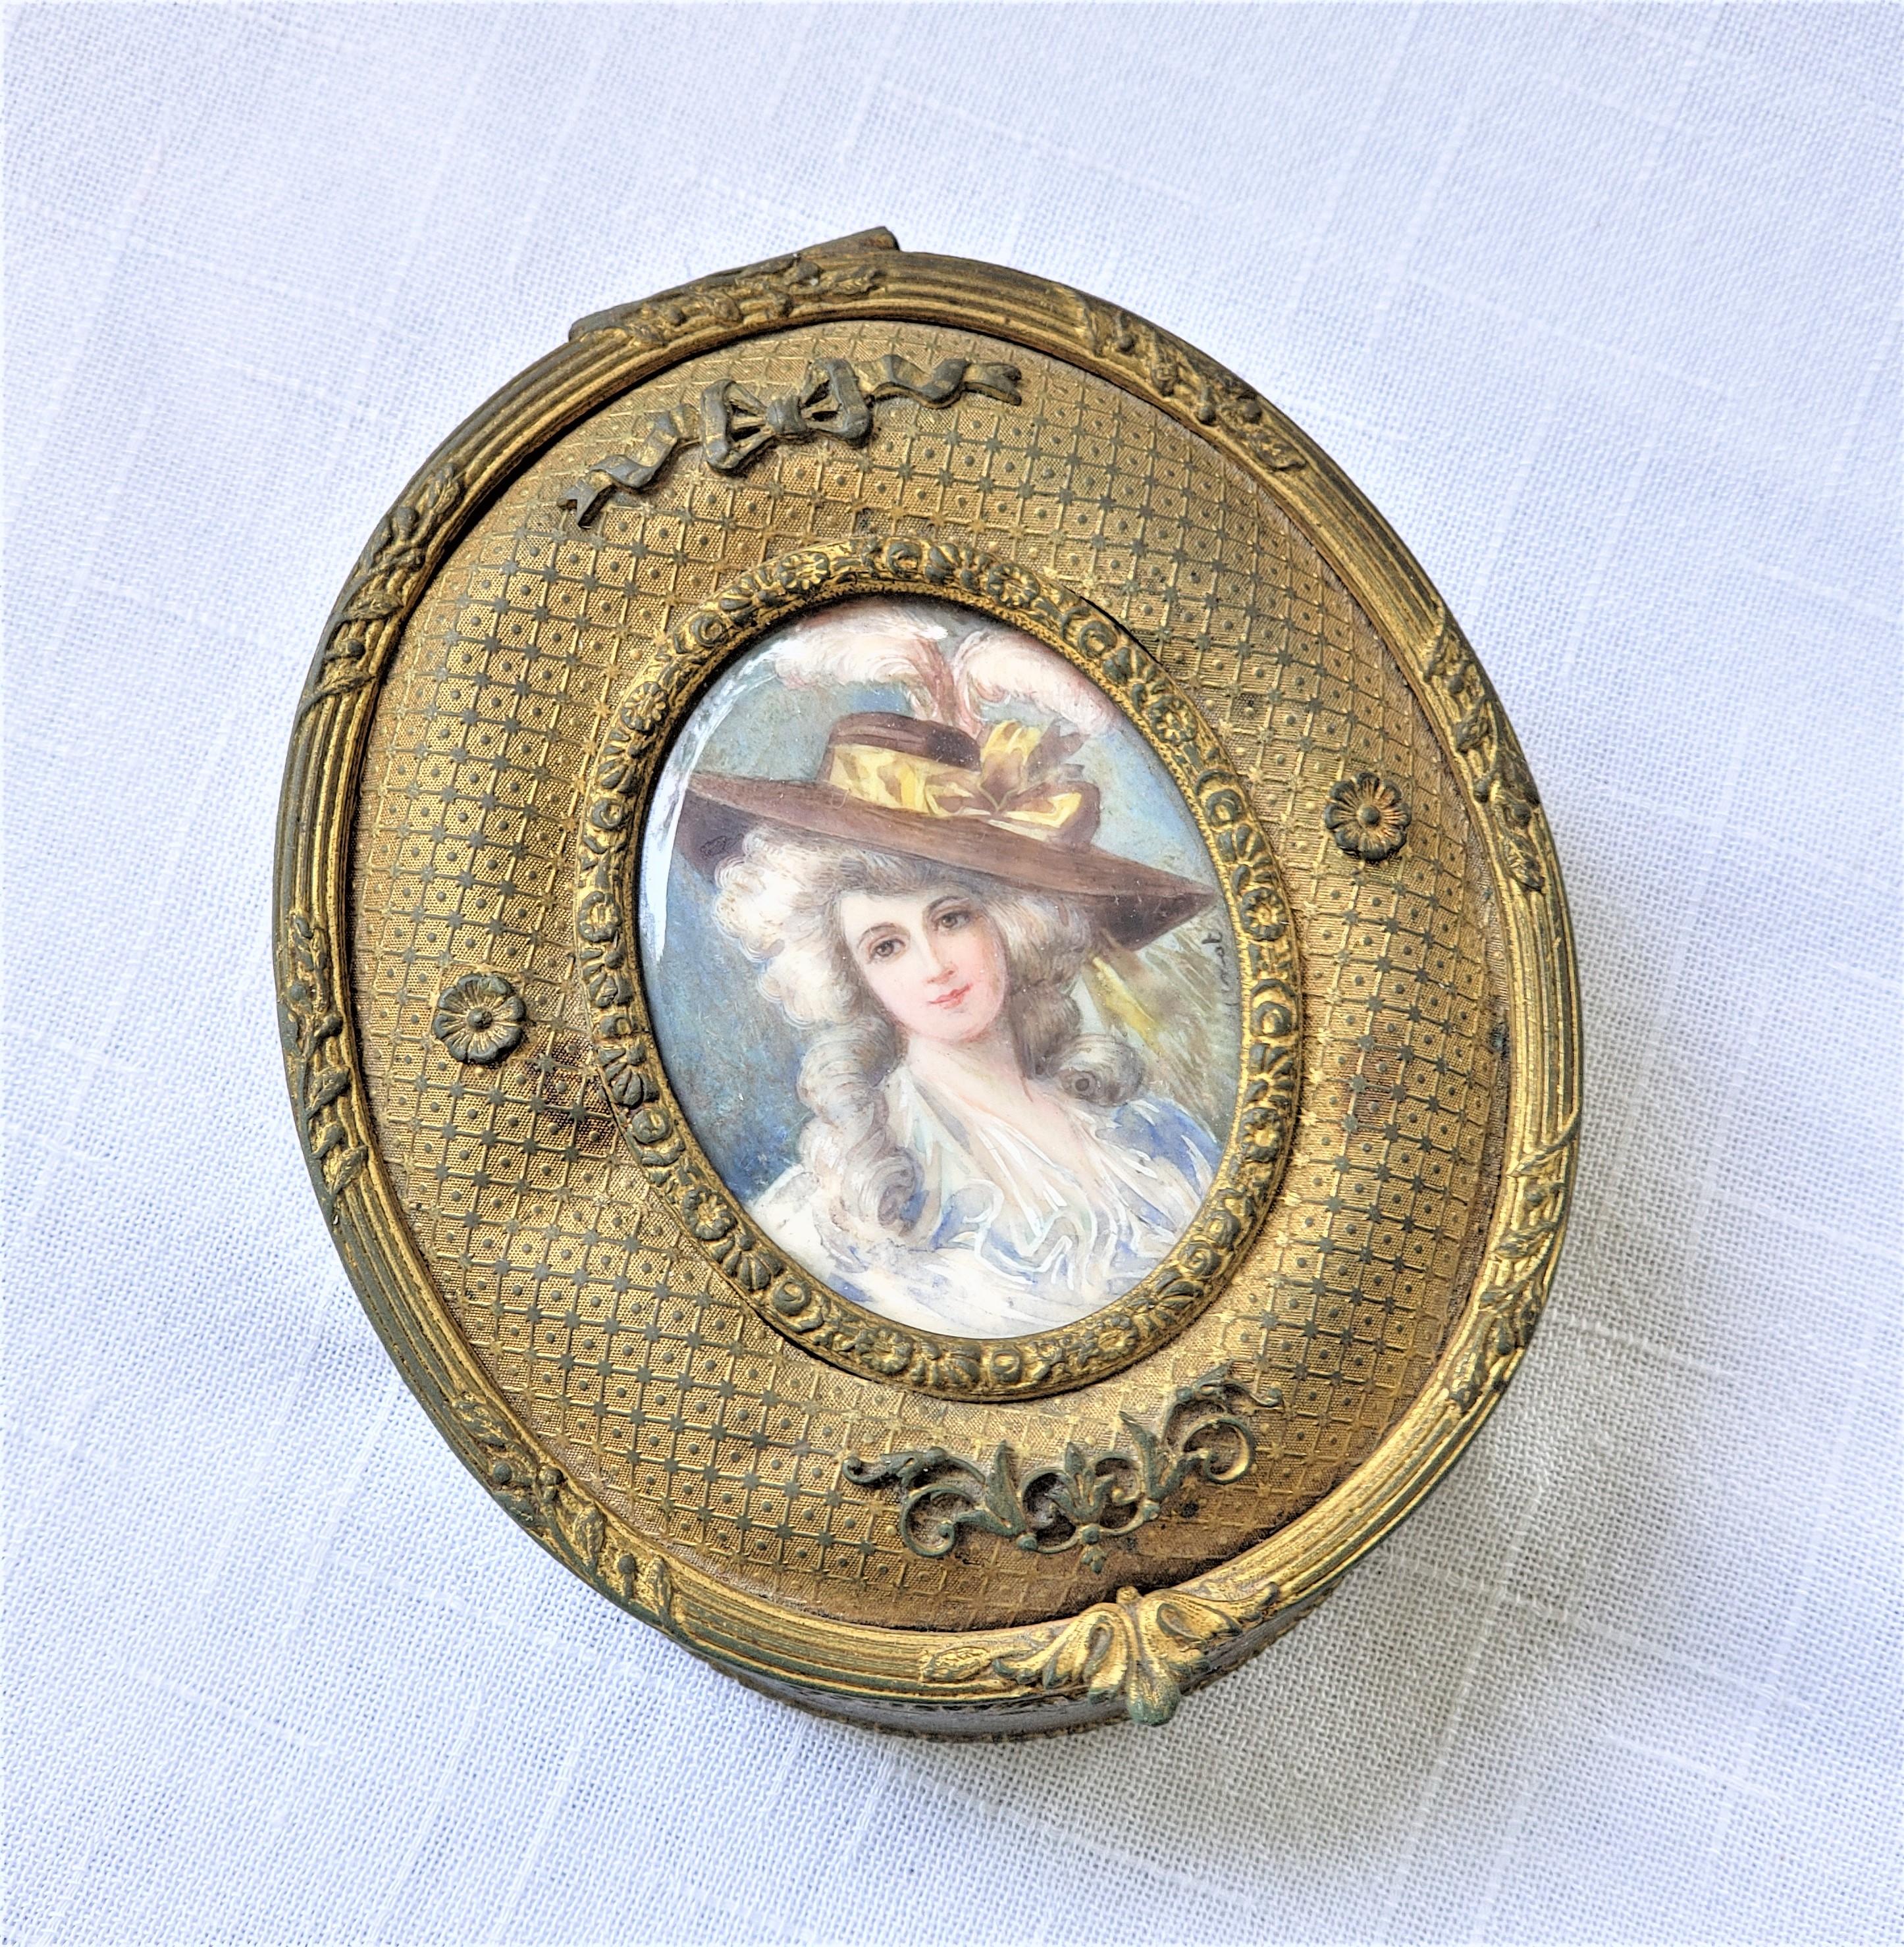 This small jewelry or decorative box has no maker's signature, but presumed to have originated from France and date to approximately 1900 and done in a Renaissance Revival style. The oval shaped box is composed of metal with a gilt finish and